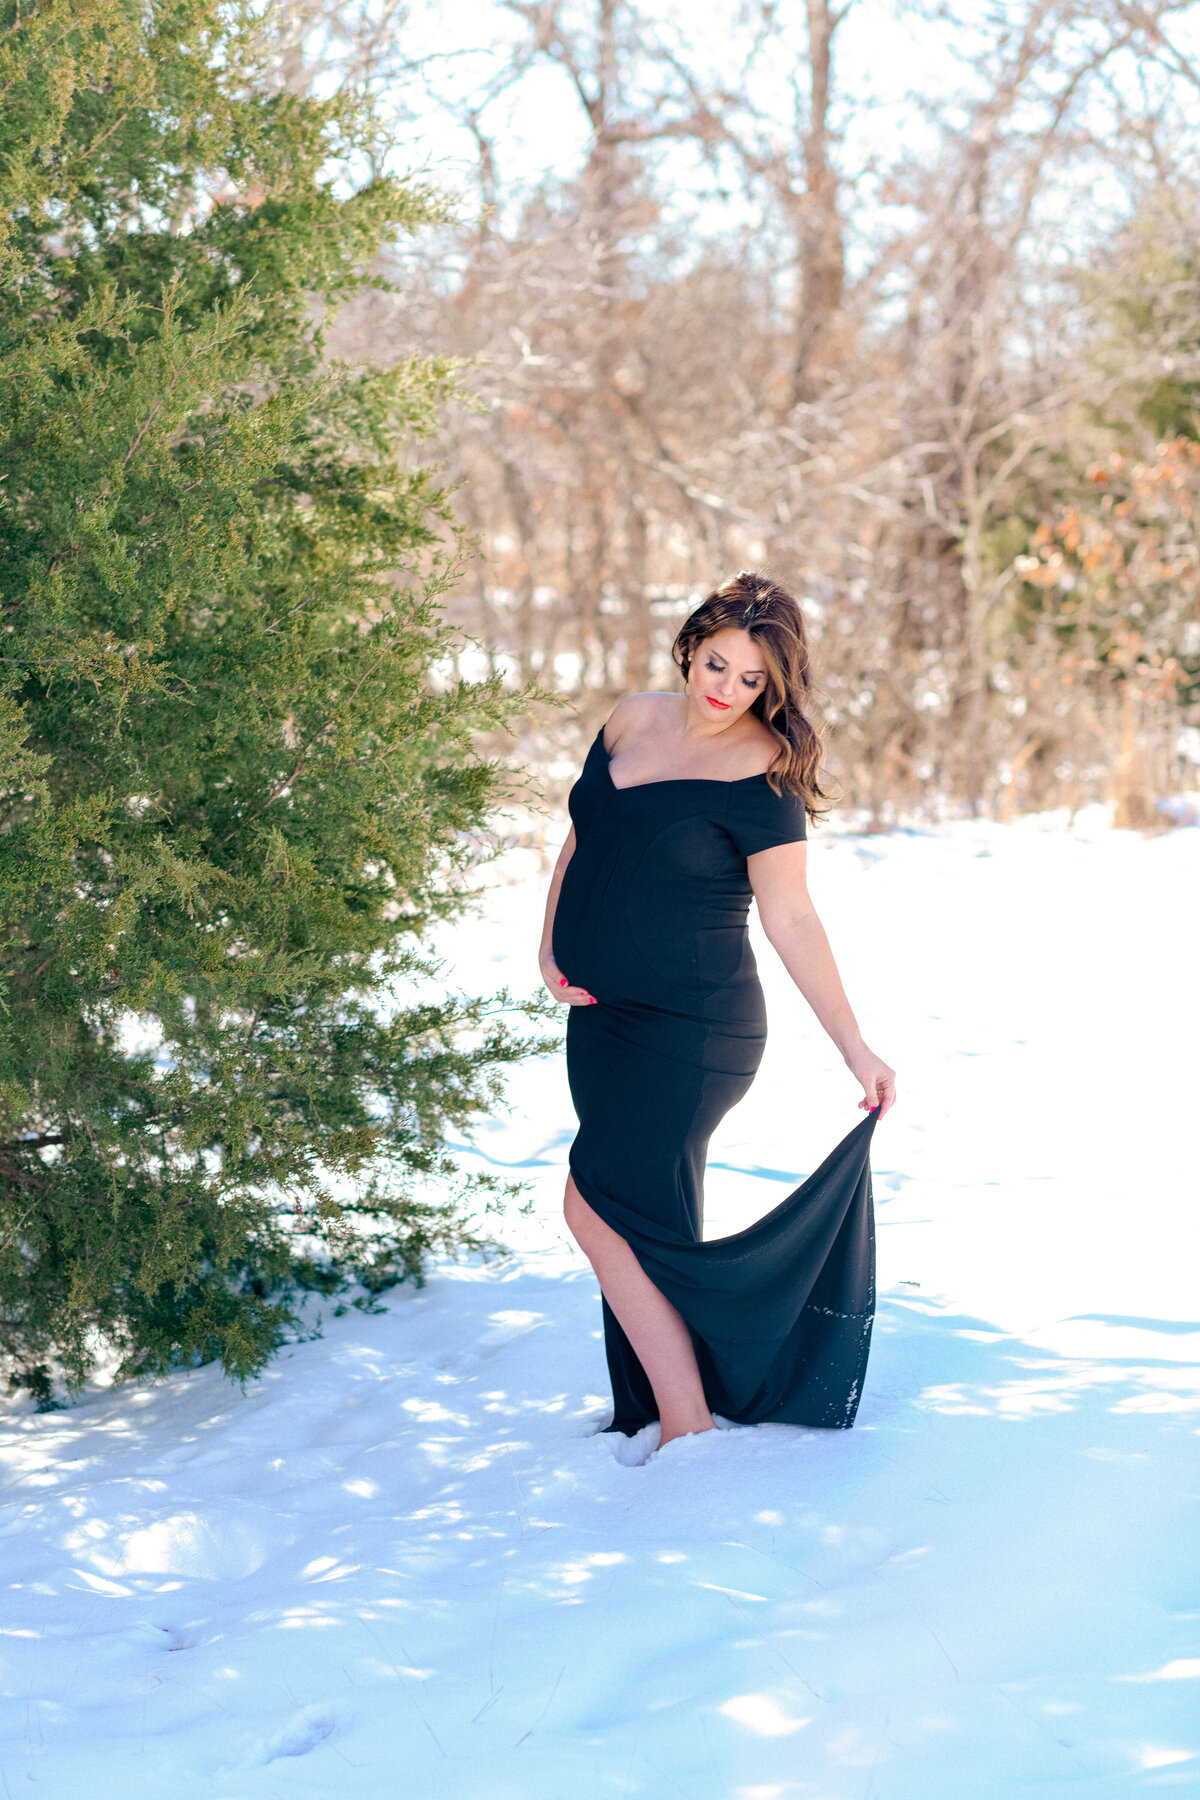 Shelley's maternity session in snow.